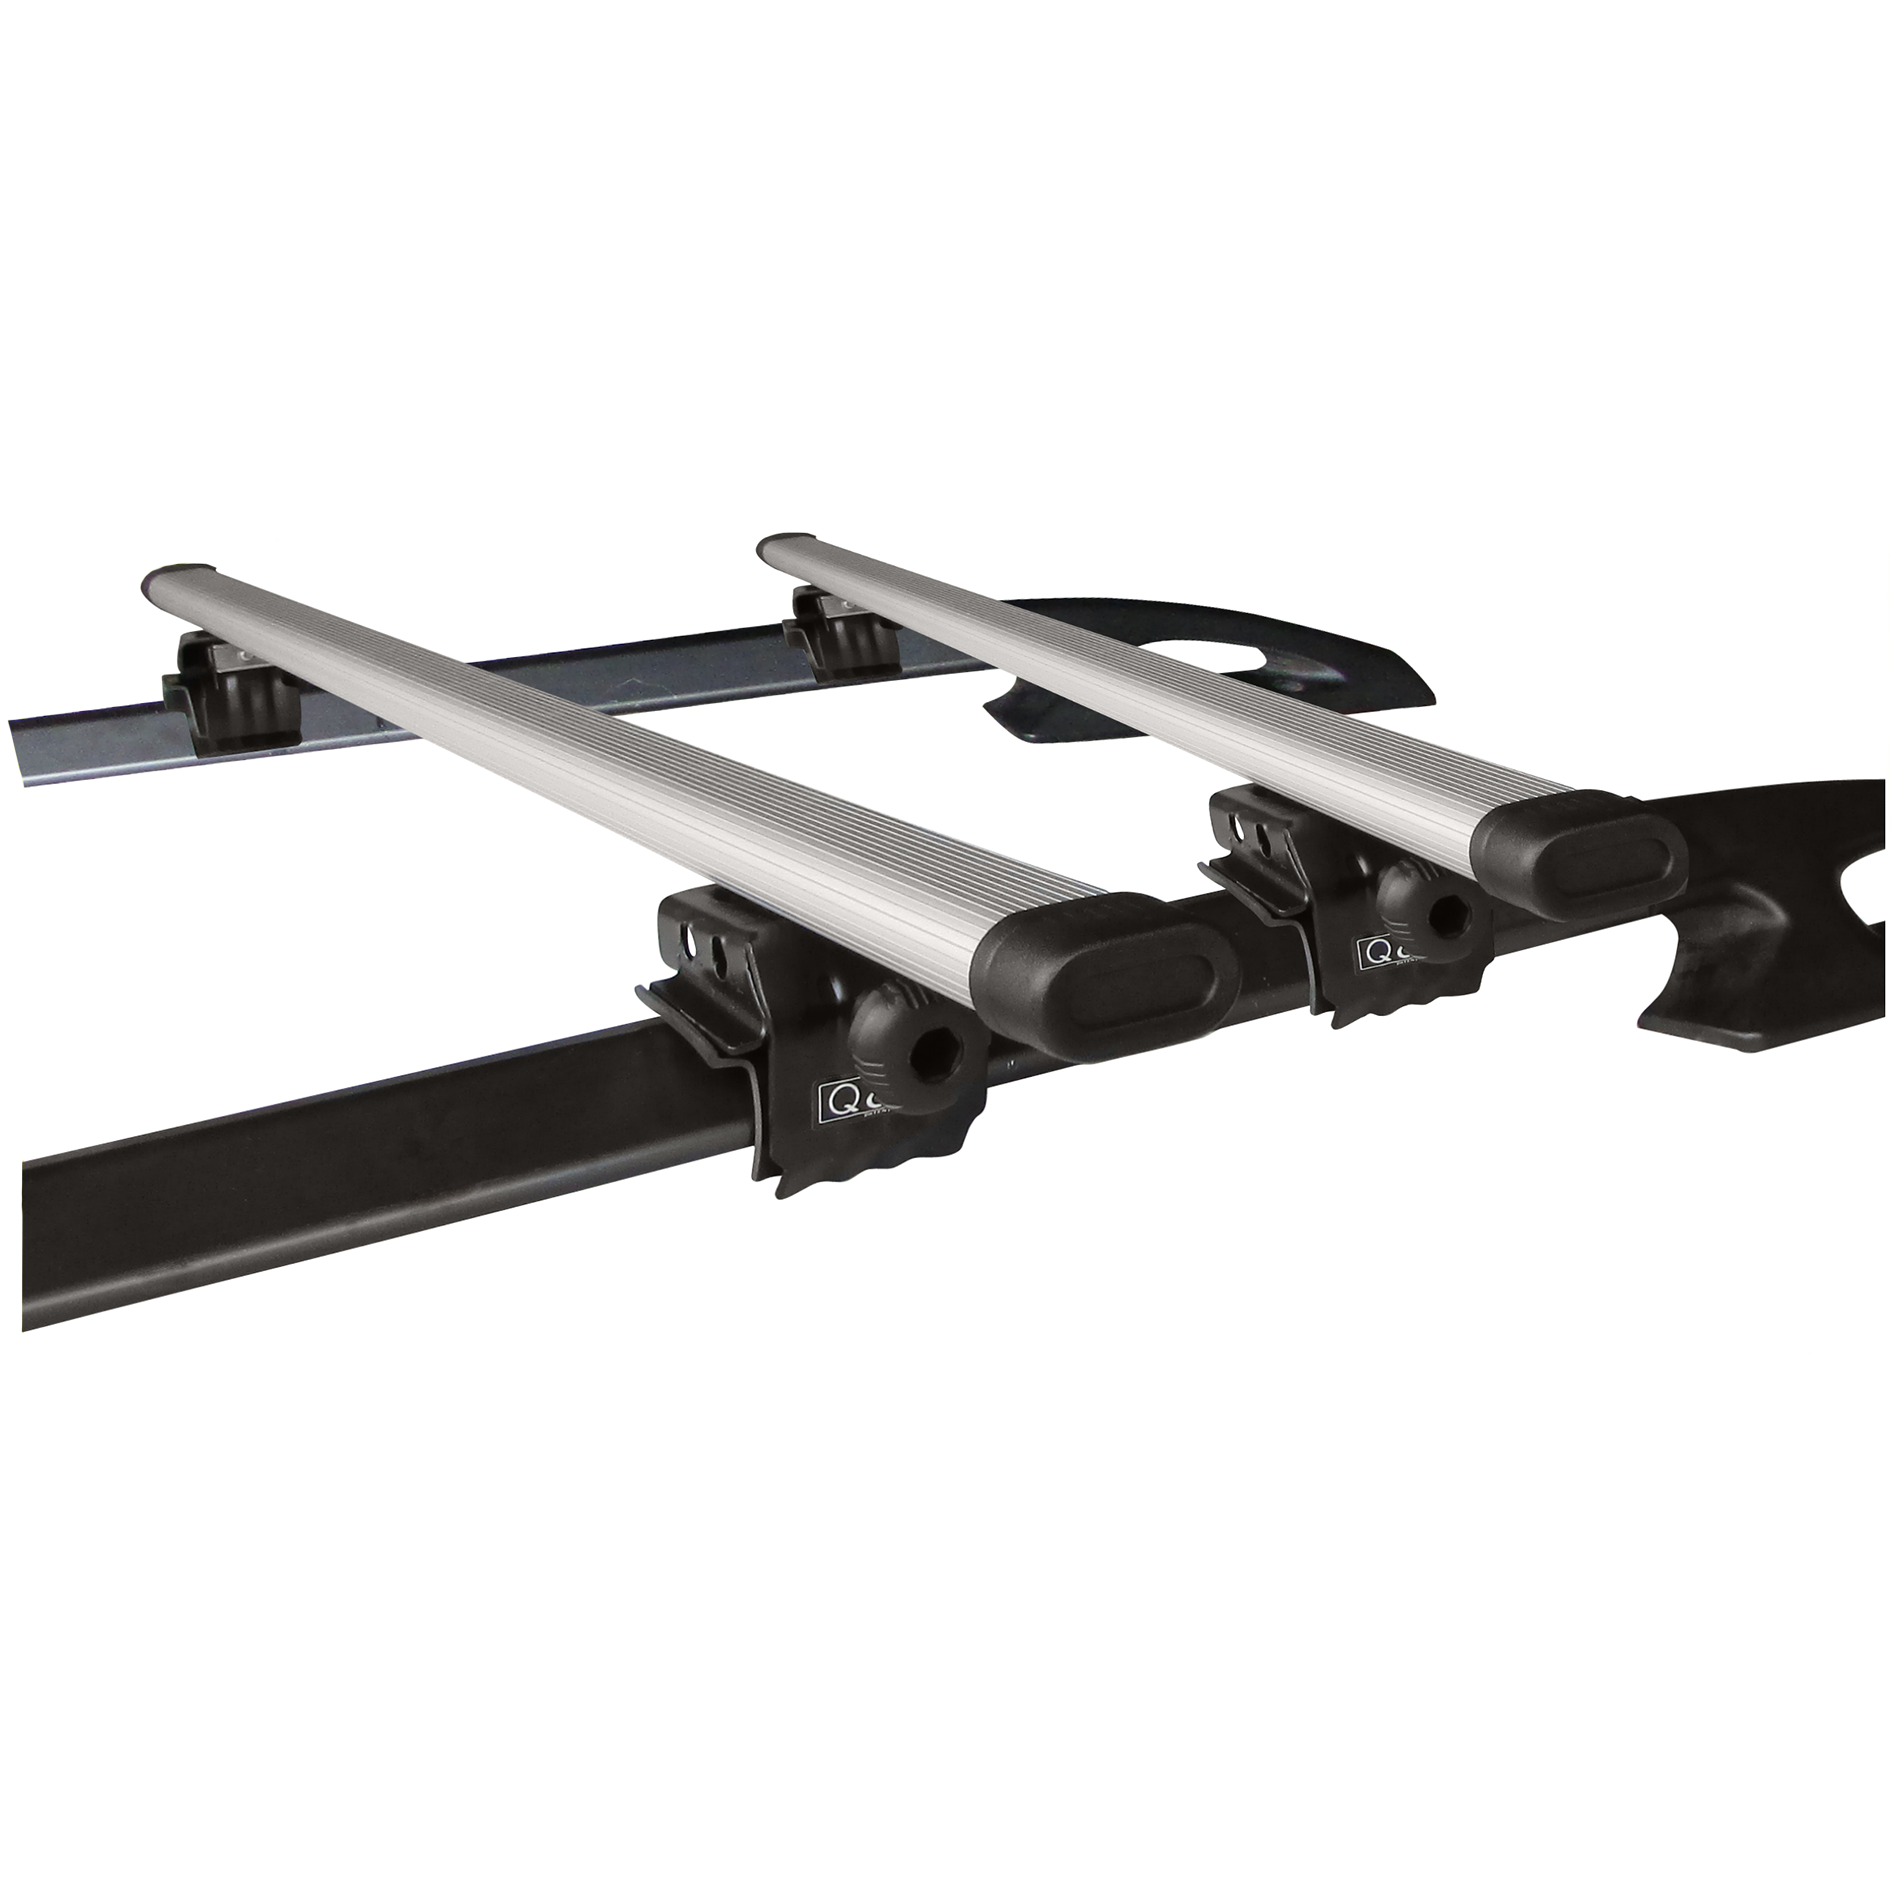 Aluminum Roof Bar / Rack for car with side rail bar QEE Loading Max. 70kgs.